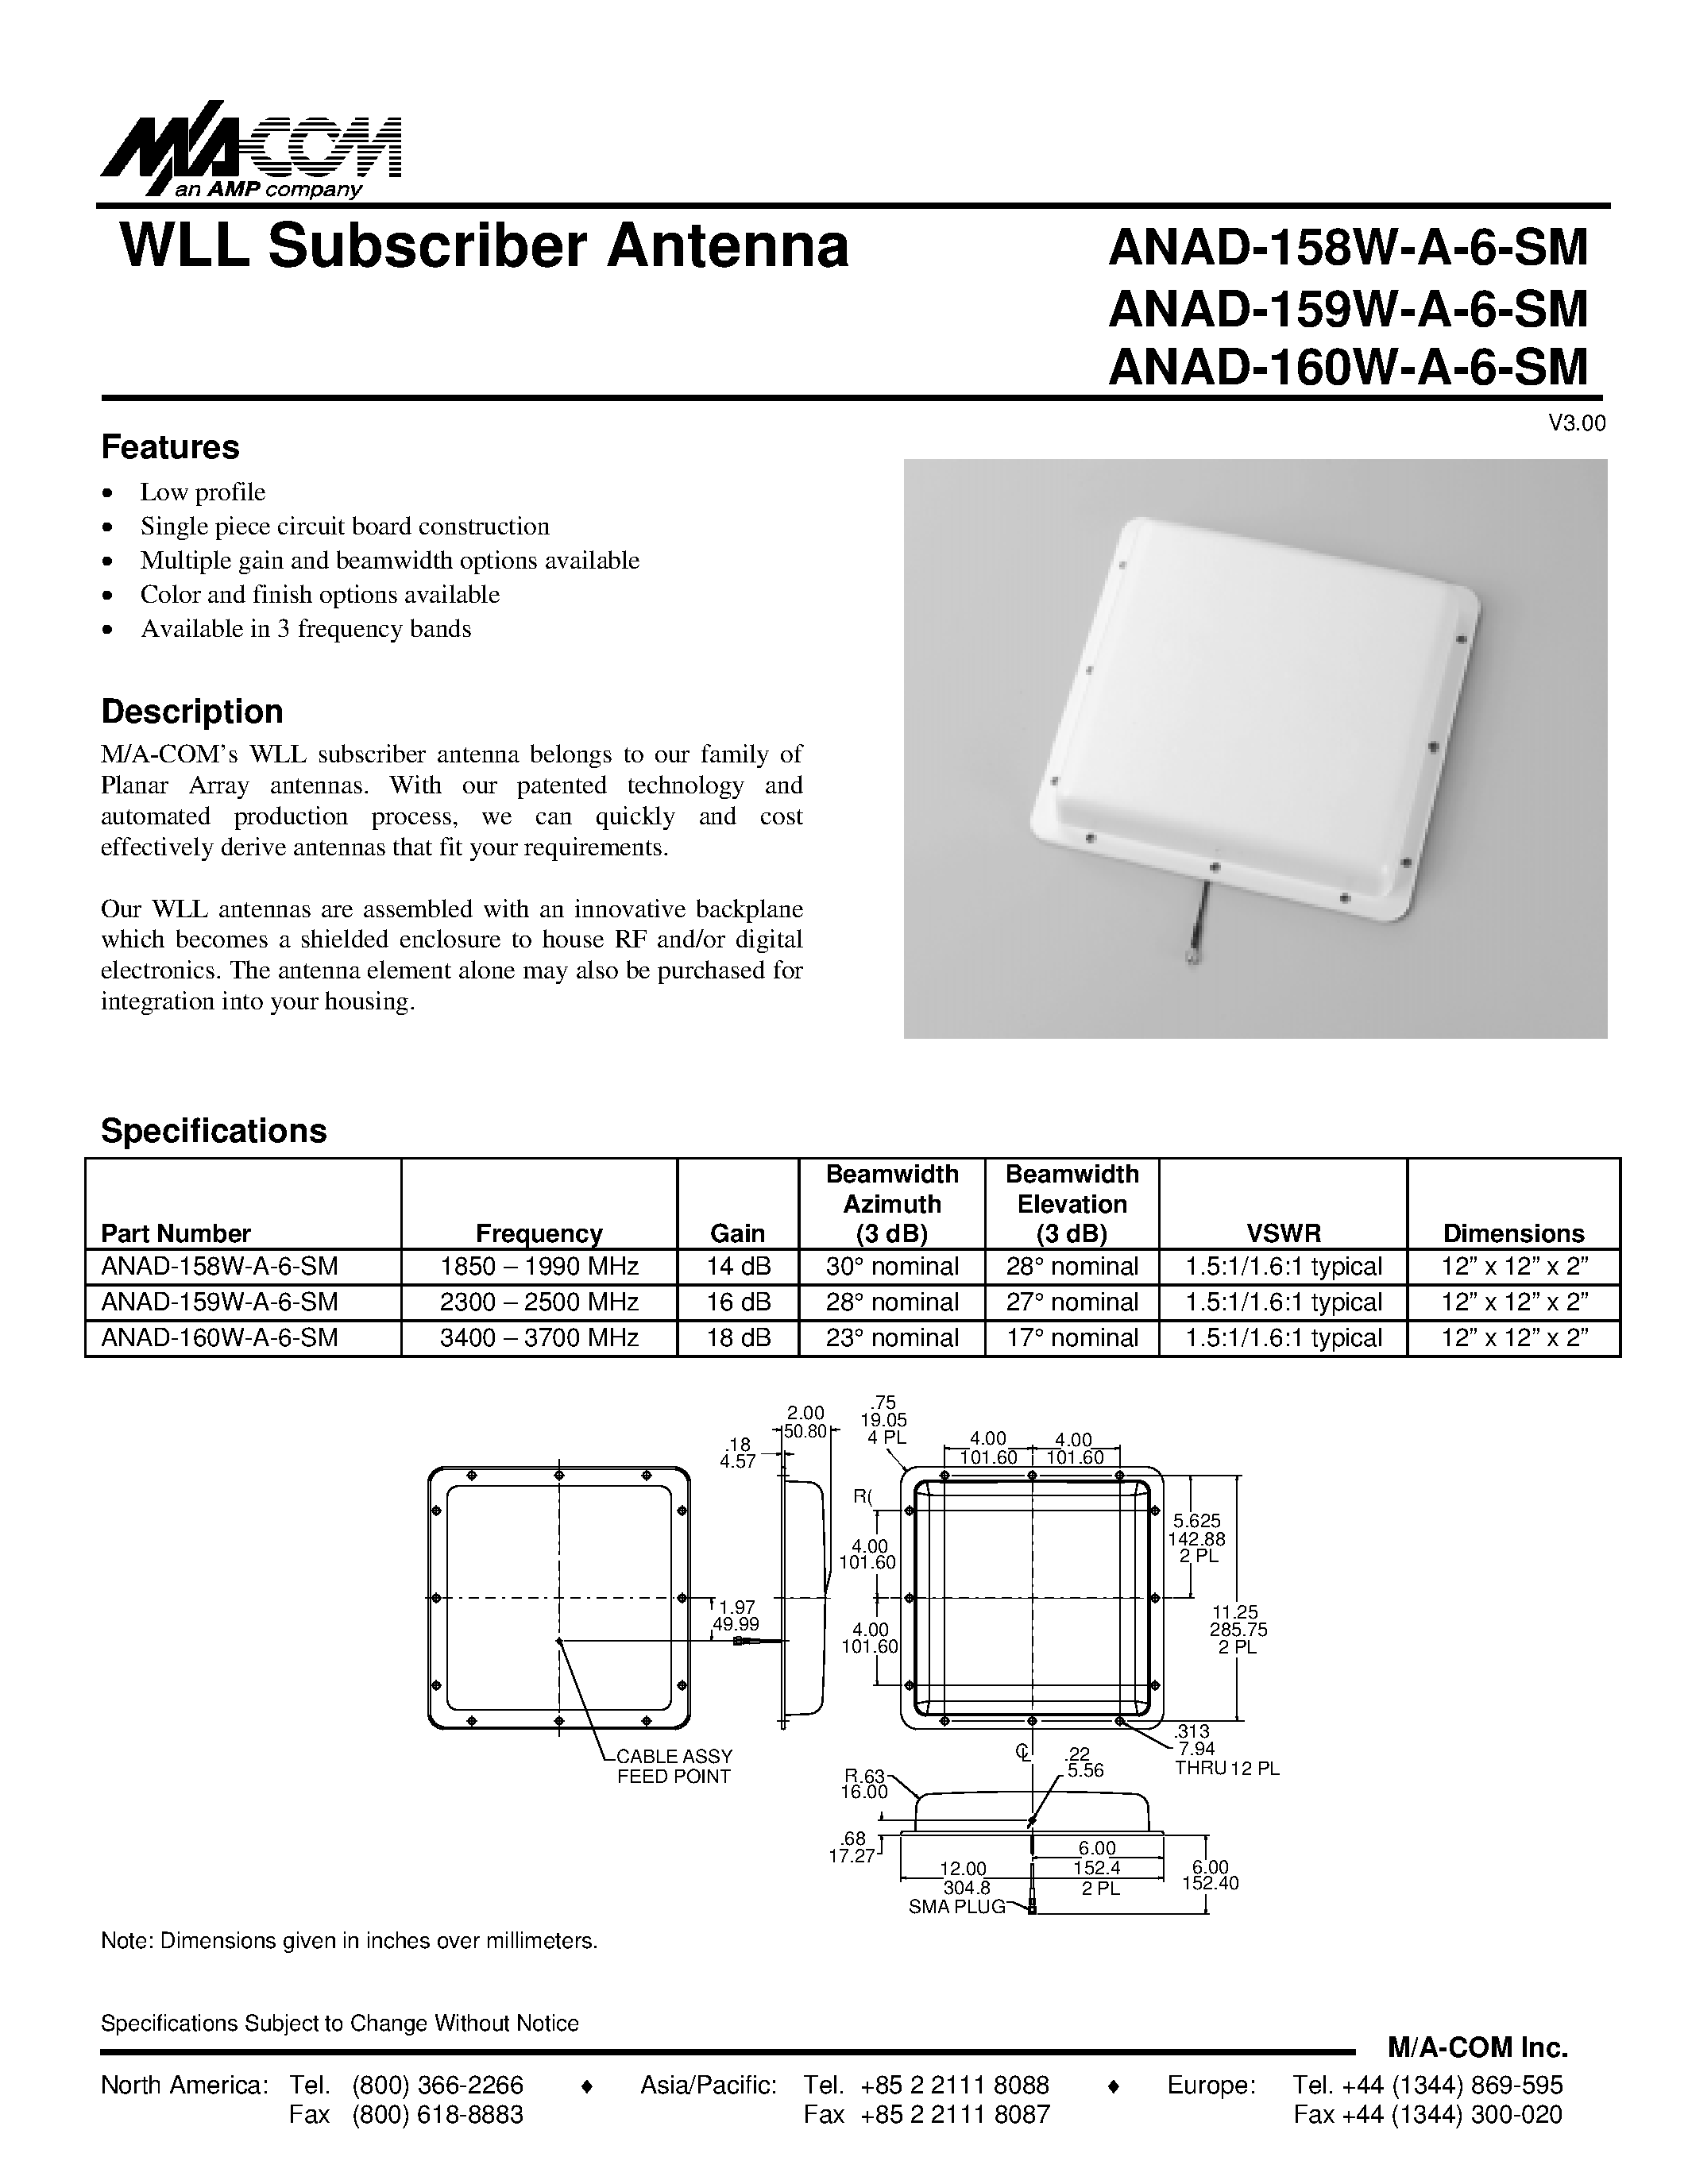 Datasheet ANAD-159W-A-6-SM - WLL Subscriber Antenna page 1